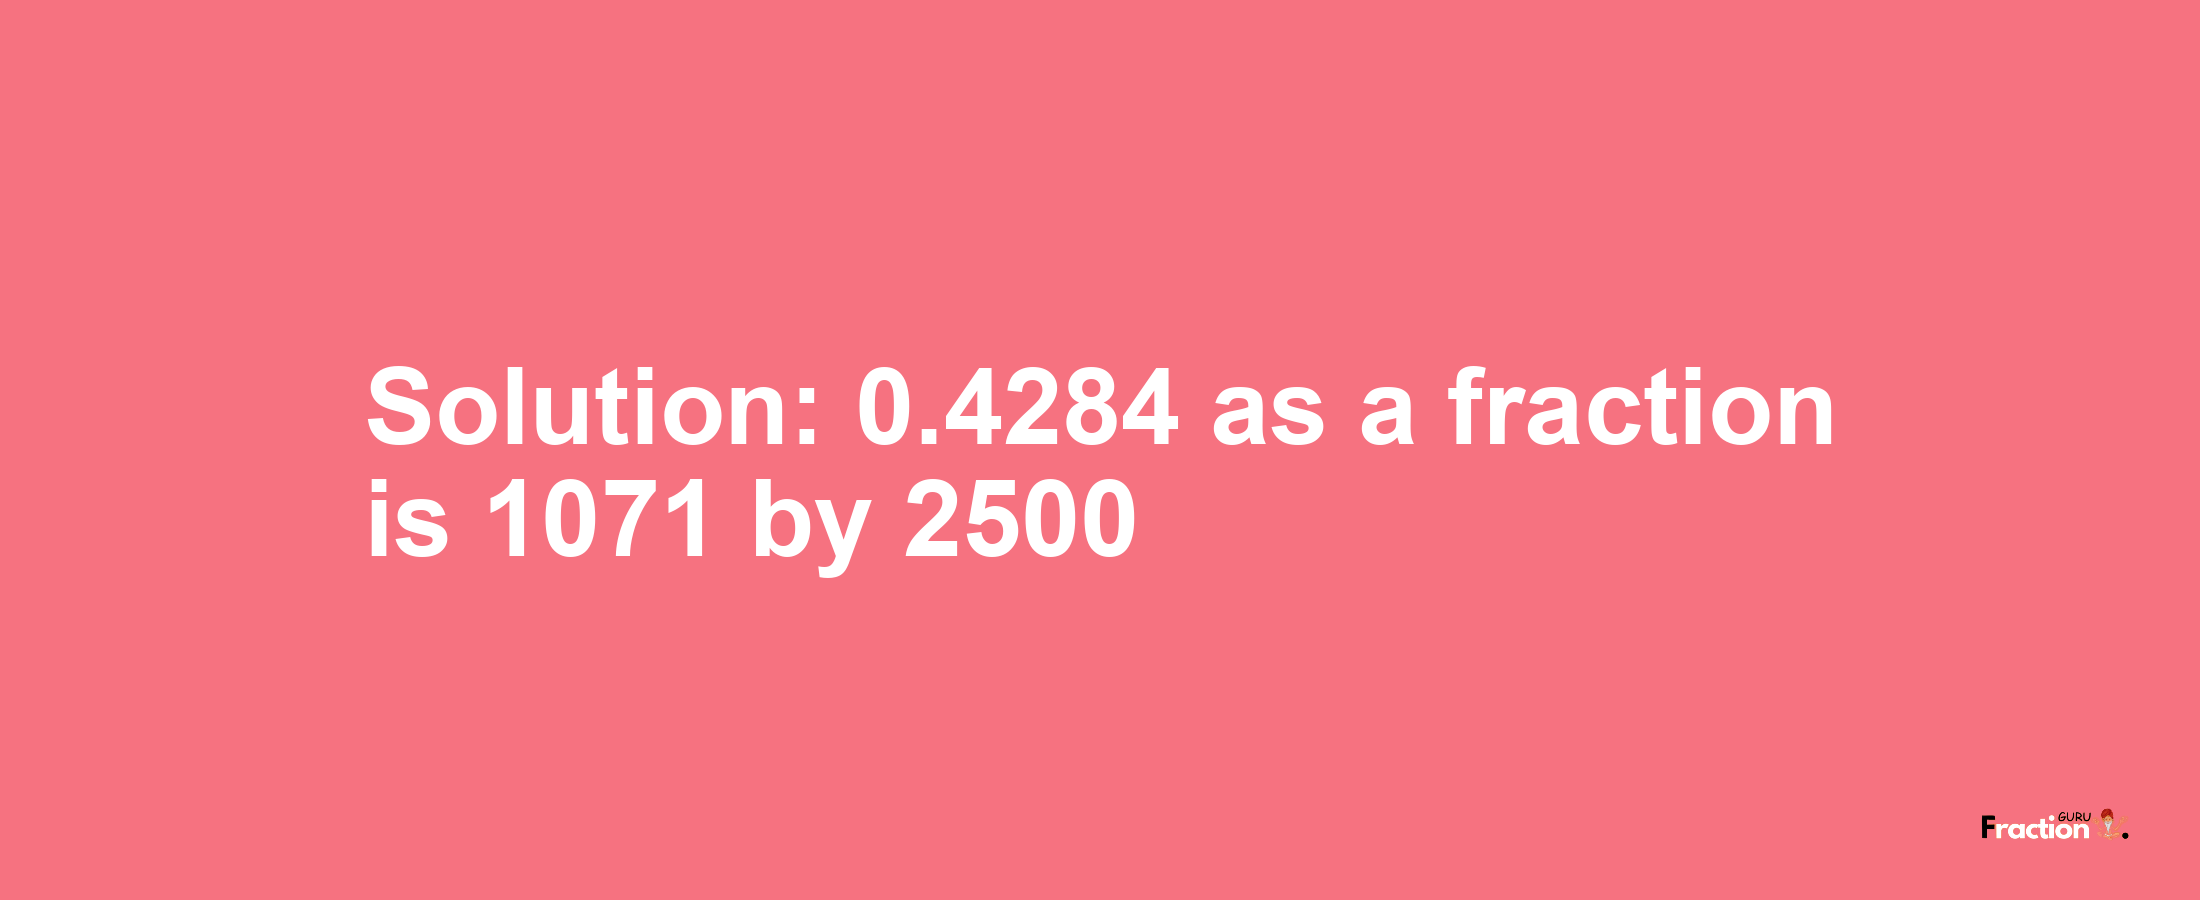 Solution:0.4284 as a fraction is 1071/2500